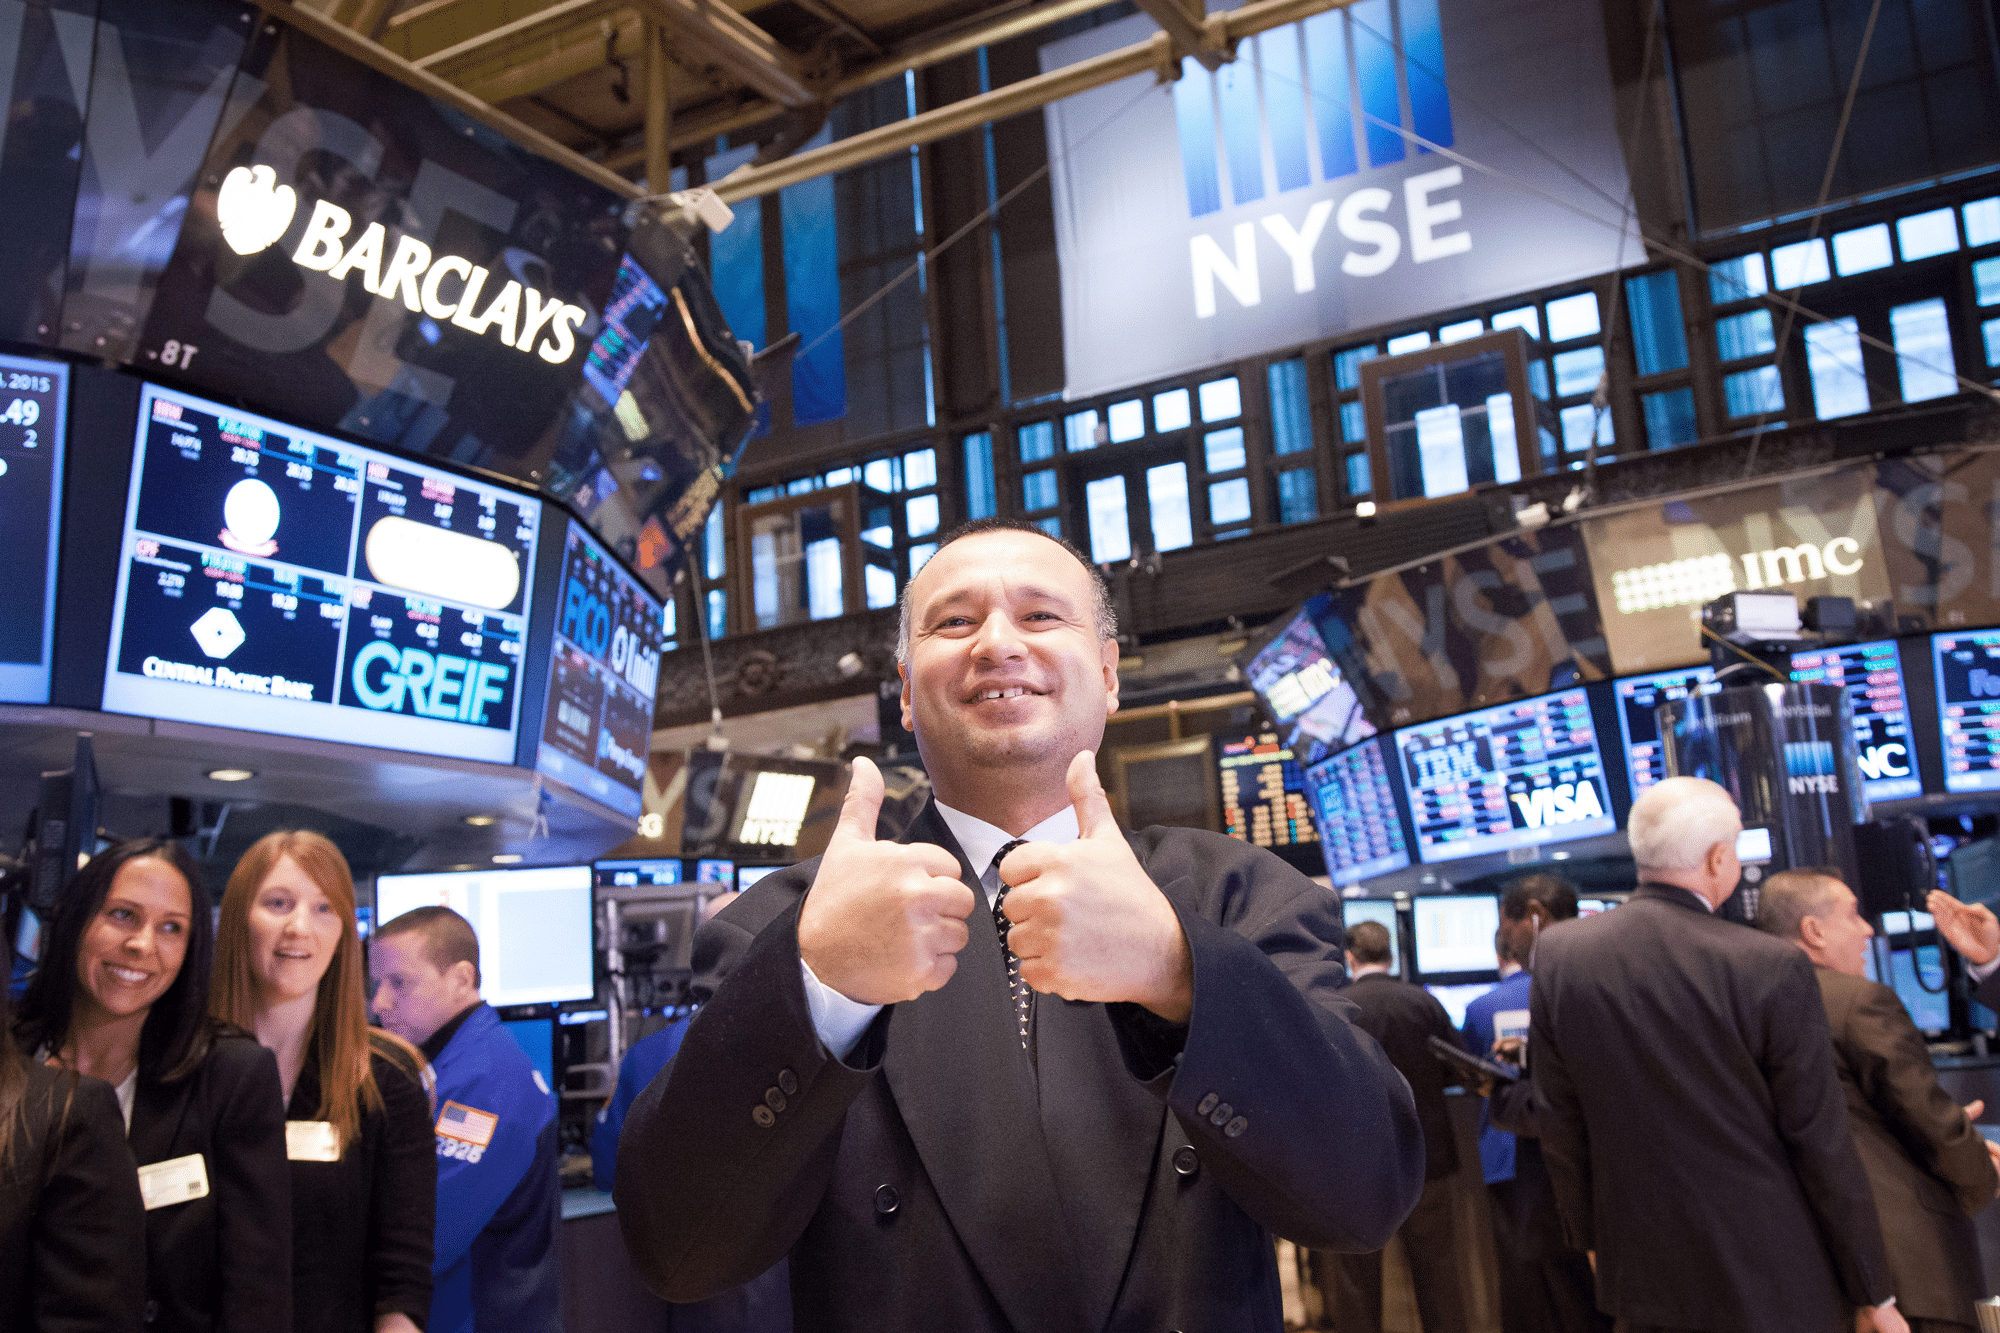 2015_New-Jersey-Man-with-Disability-Rings-Opening-Bell-at_NYSE